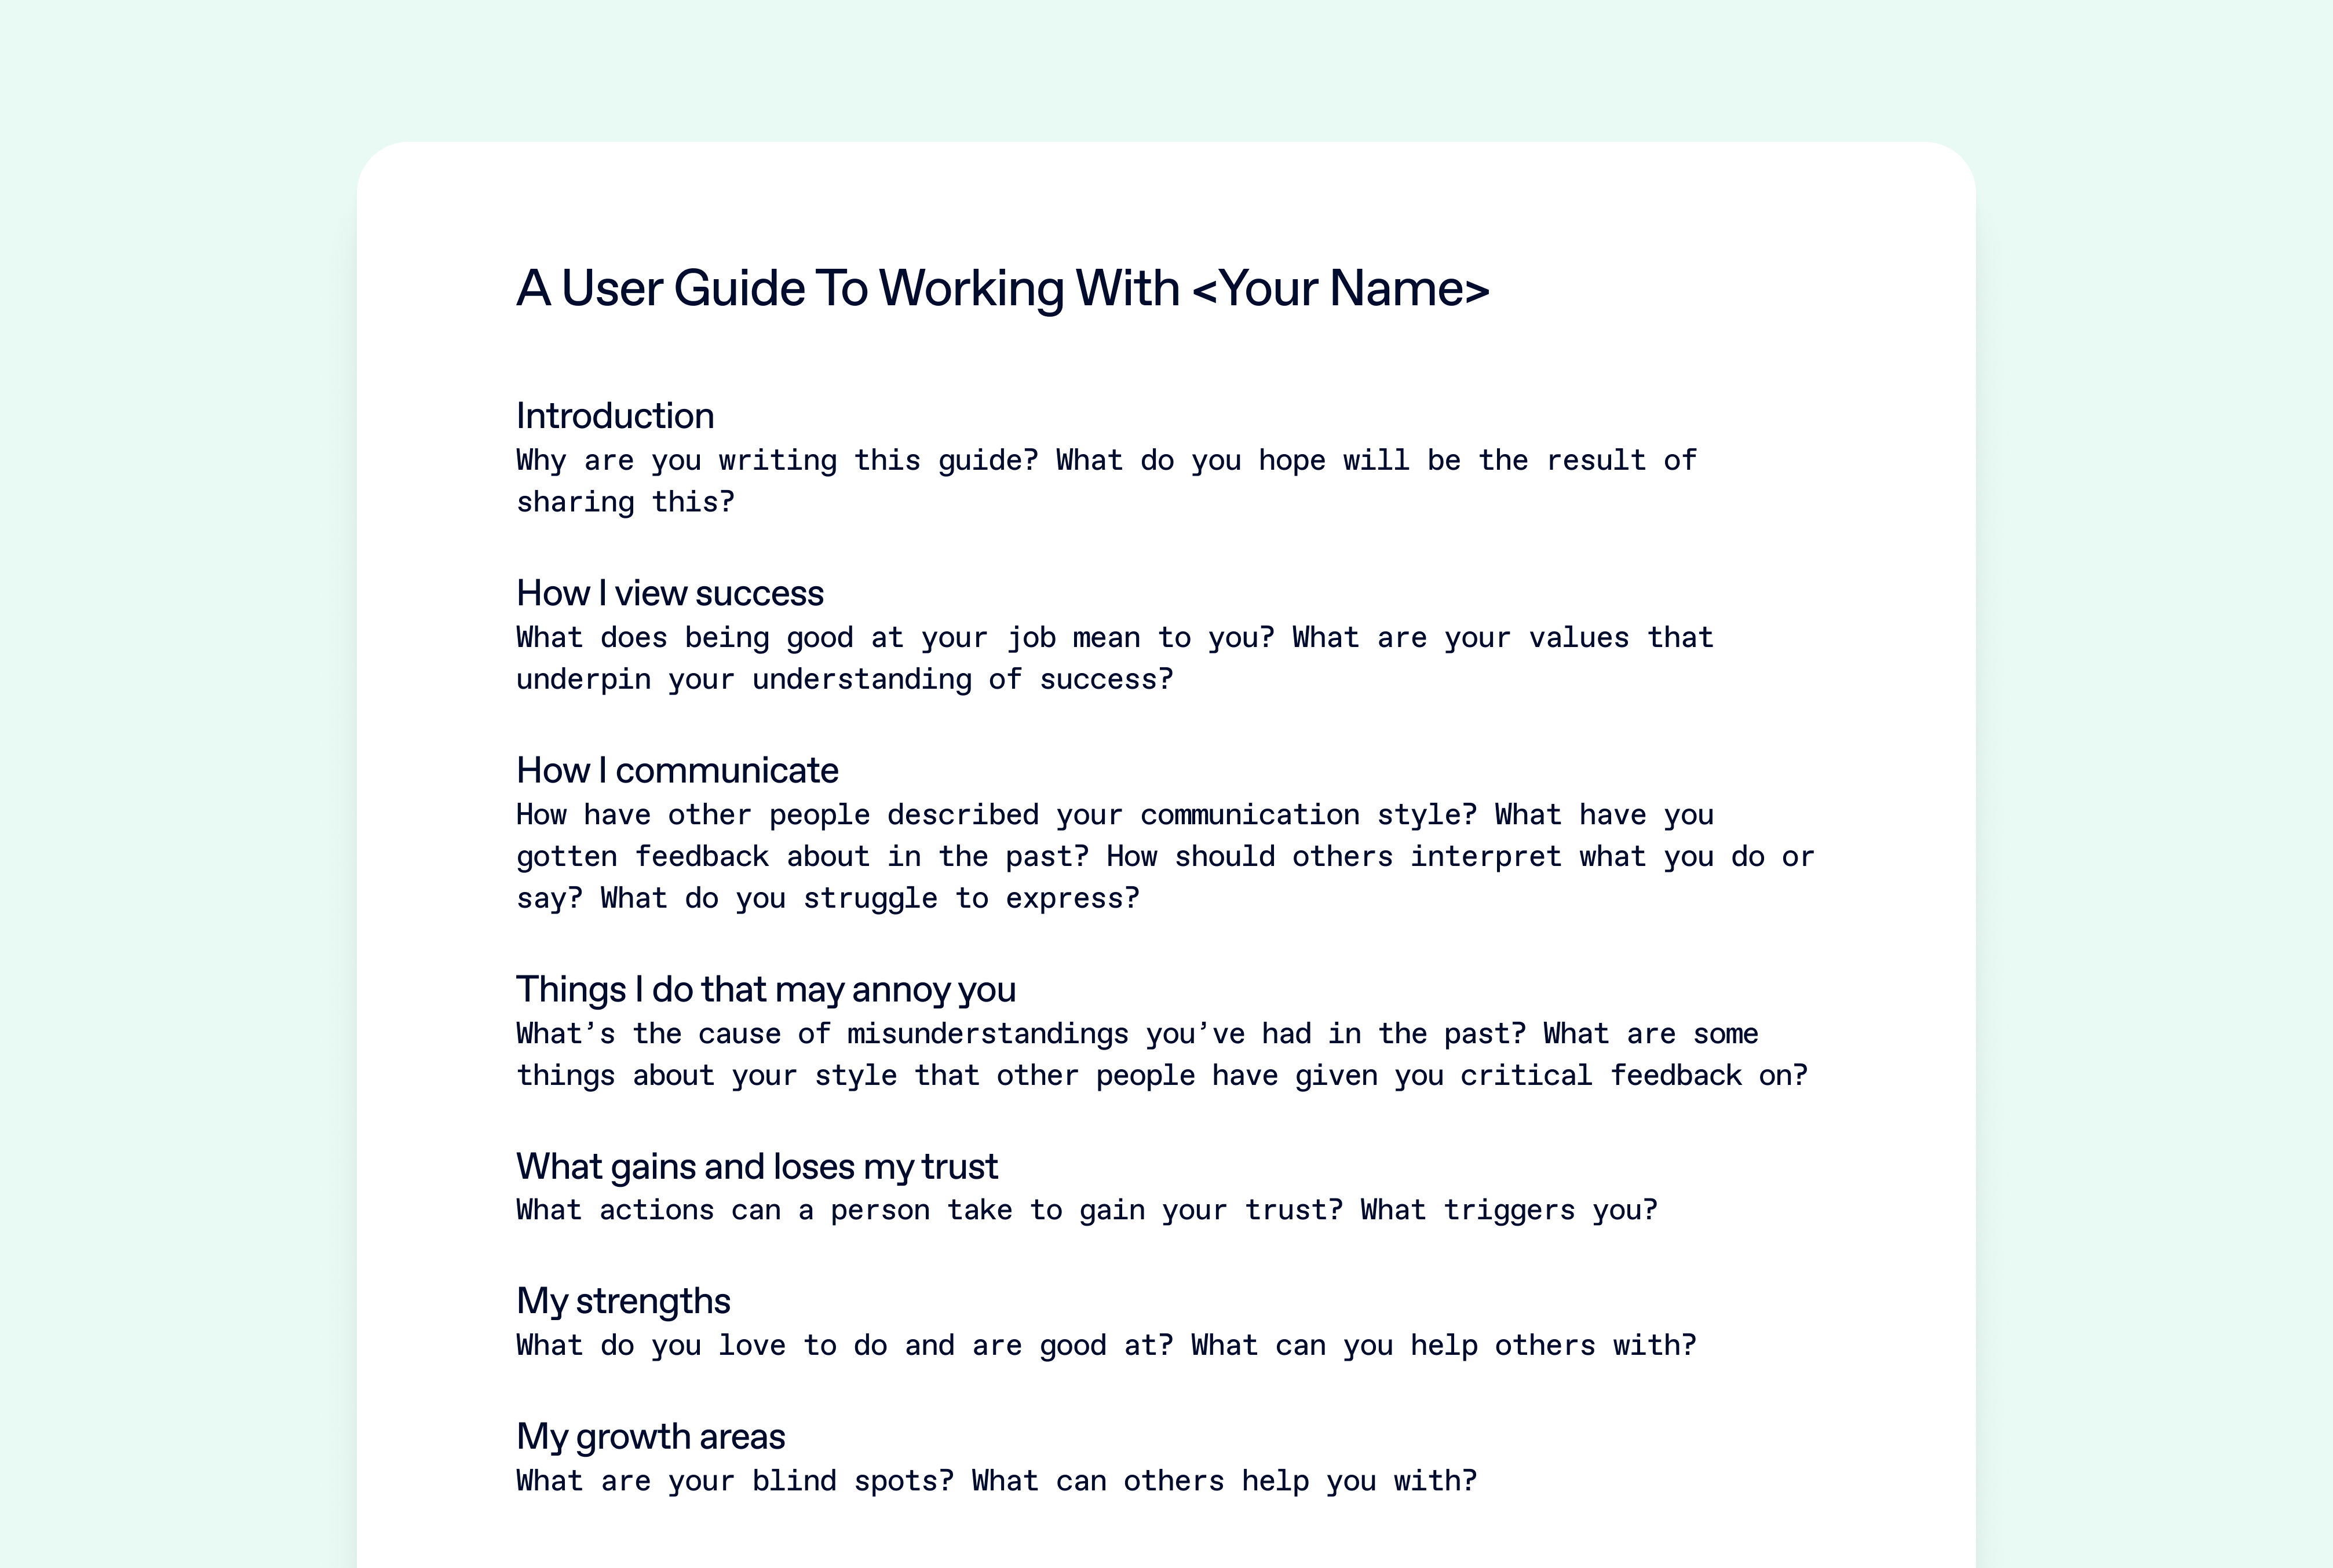 Julie Zhuo's user guide to working with you